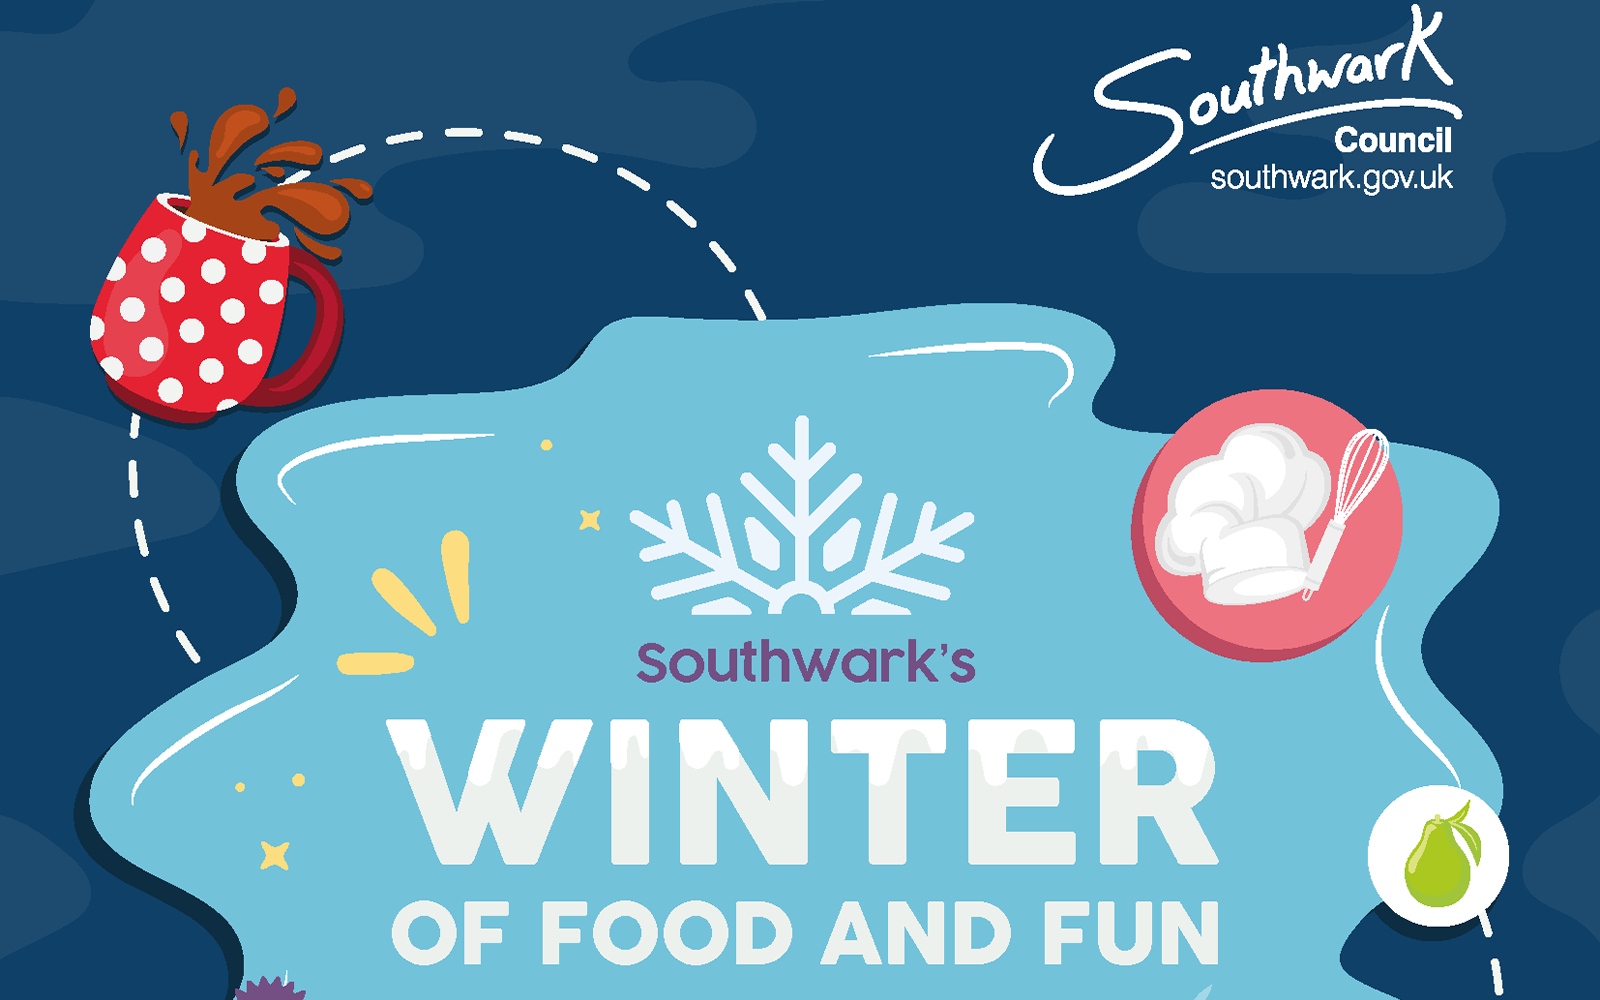 Millwall Community Trust - Southwark's Winter of Food and Fun